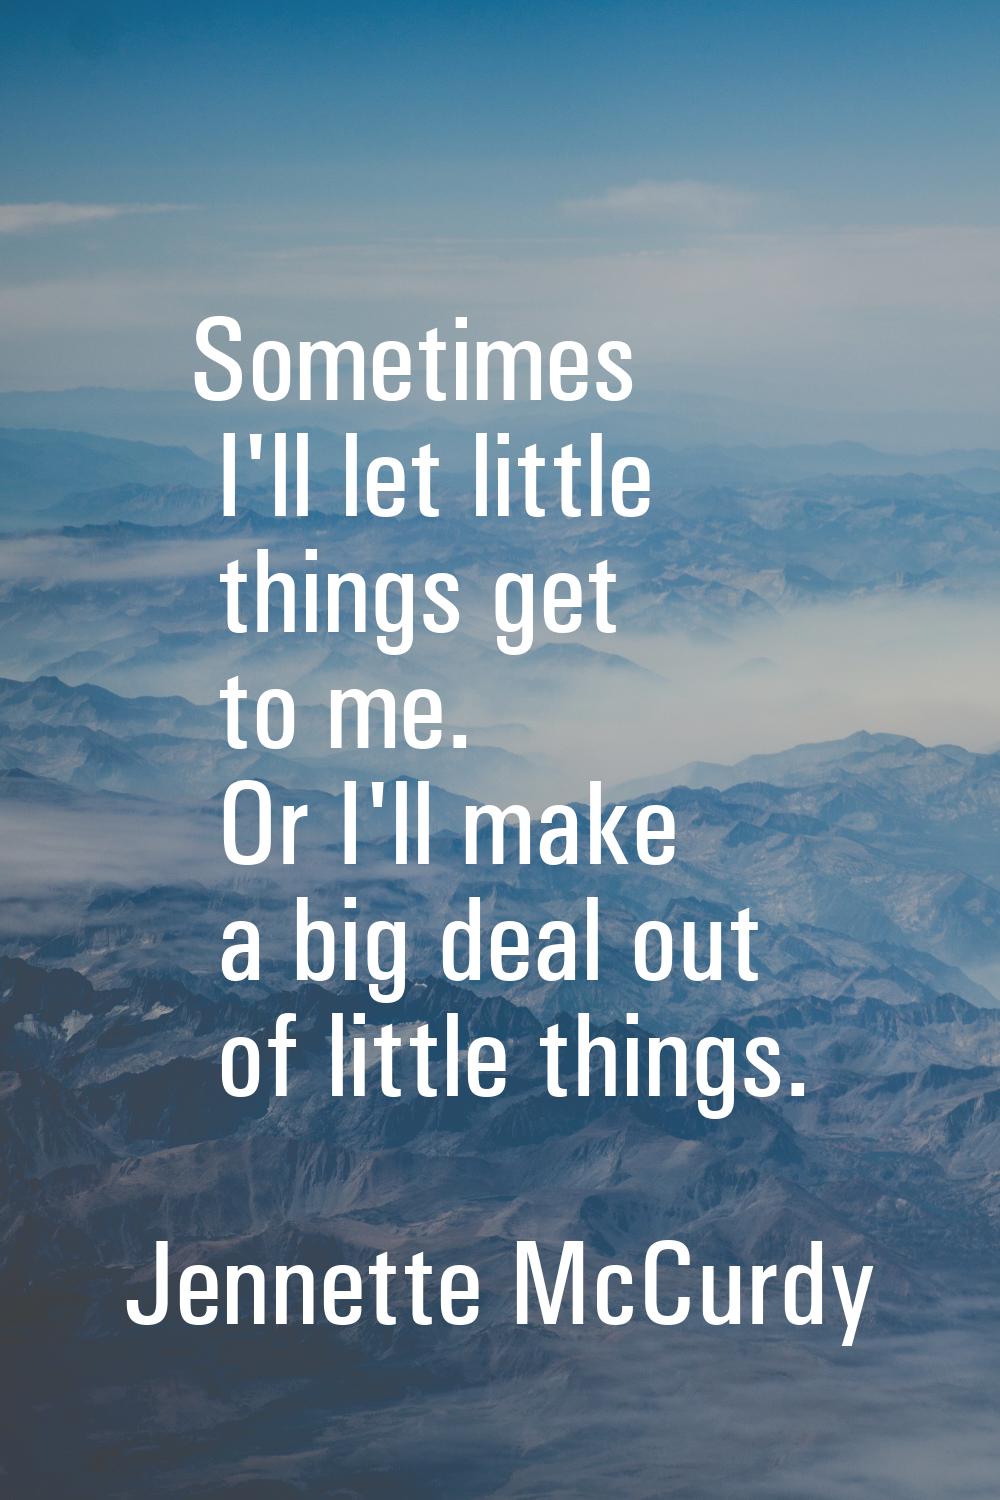 Sometimes I'll let little things get to me. Or I'll make a big deal out of little things.